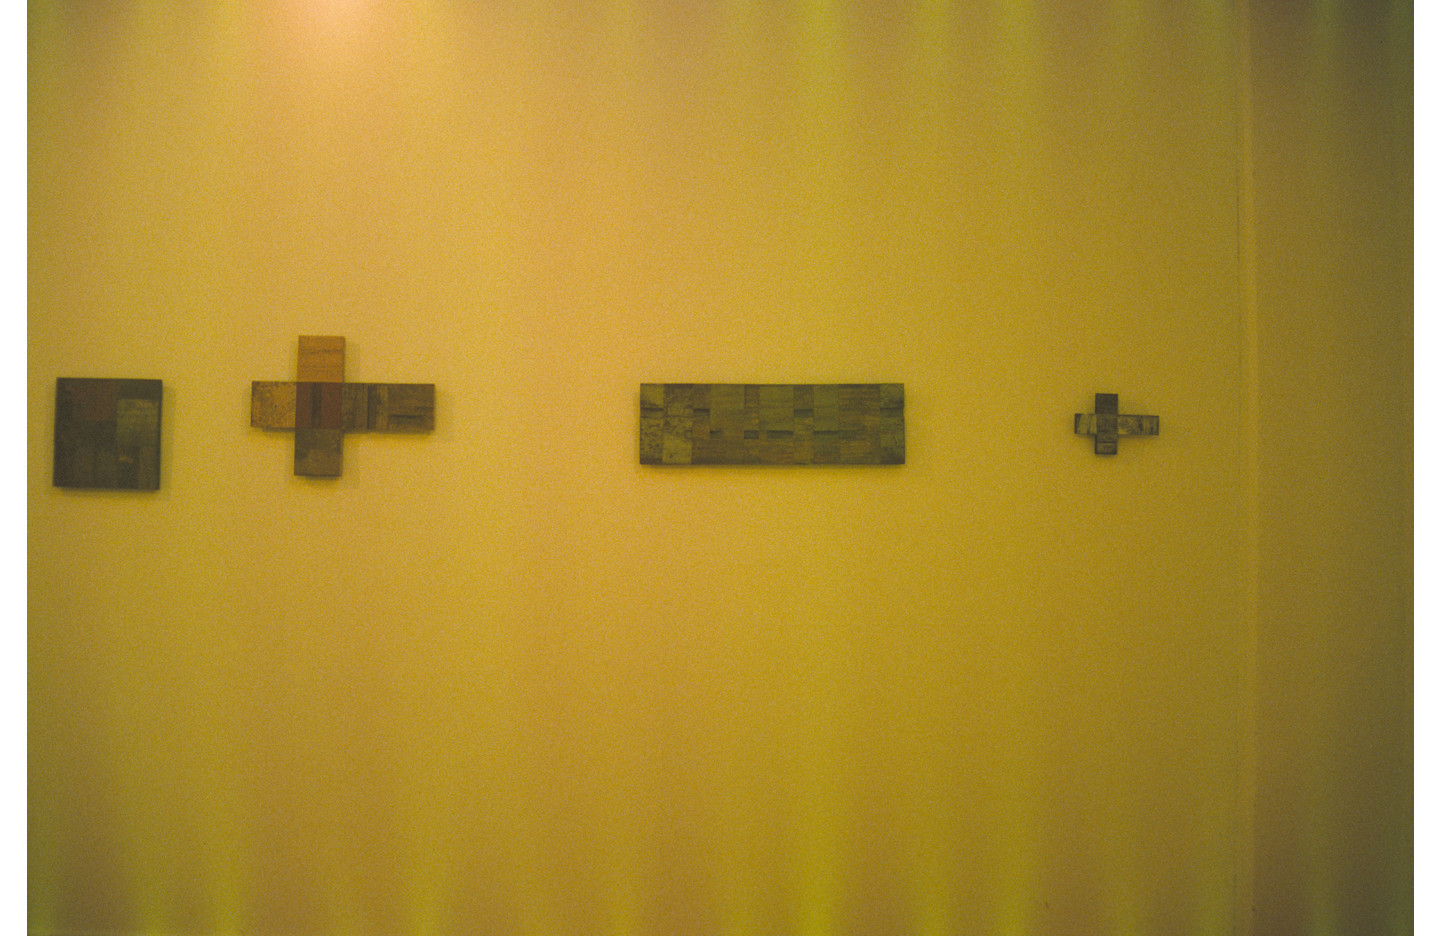 Paintings - unexpected places, Ramp Gallery (2001)